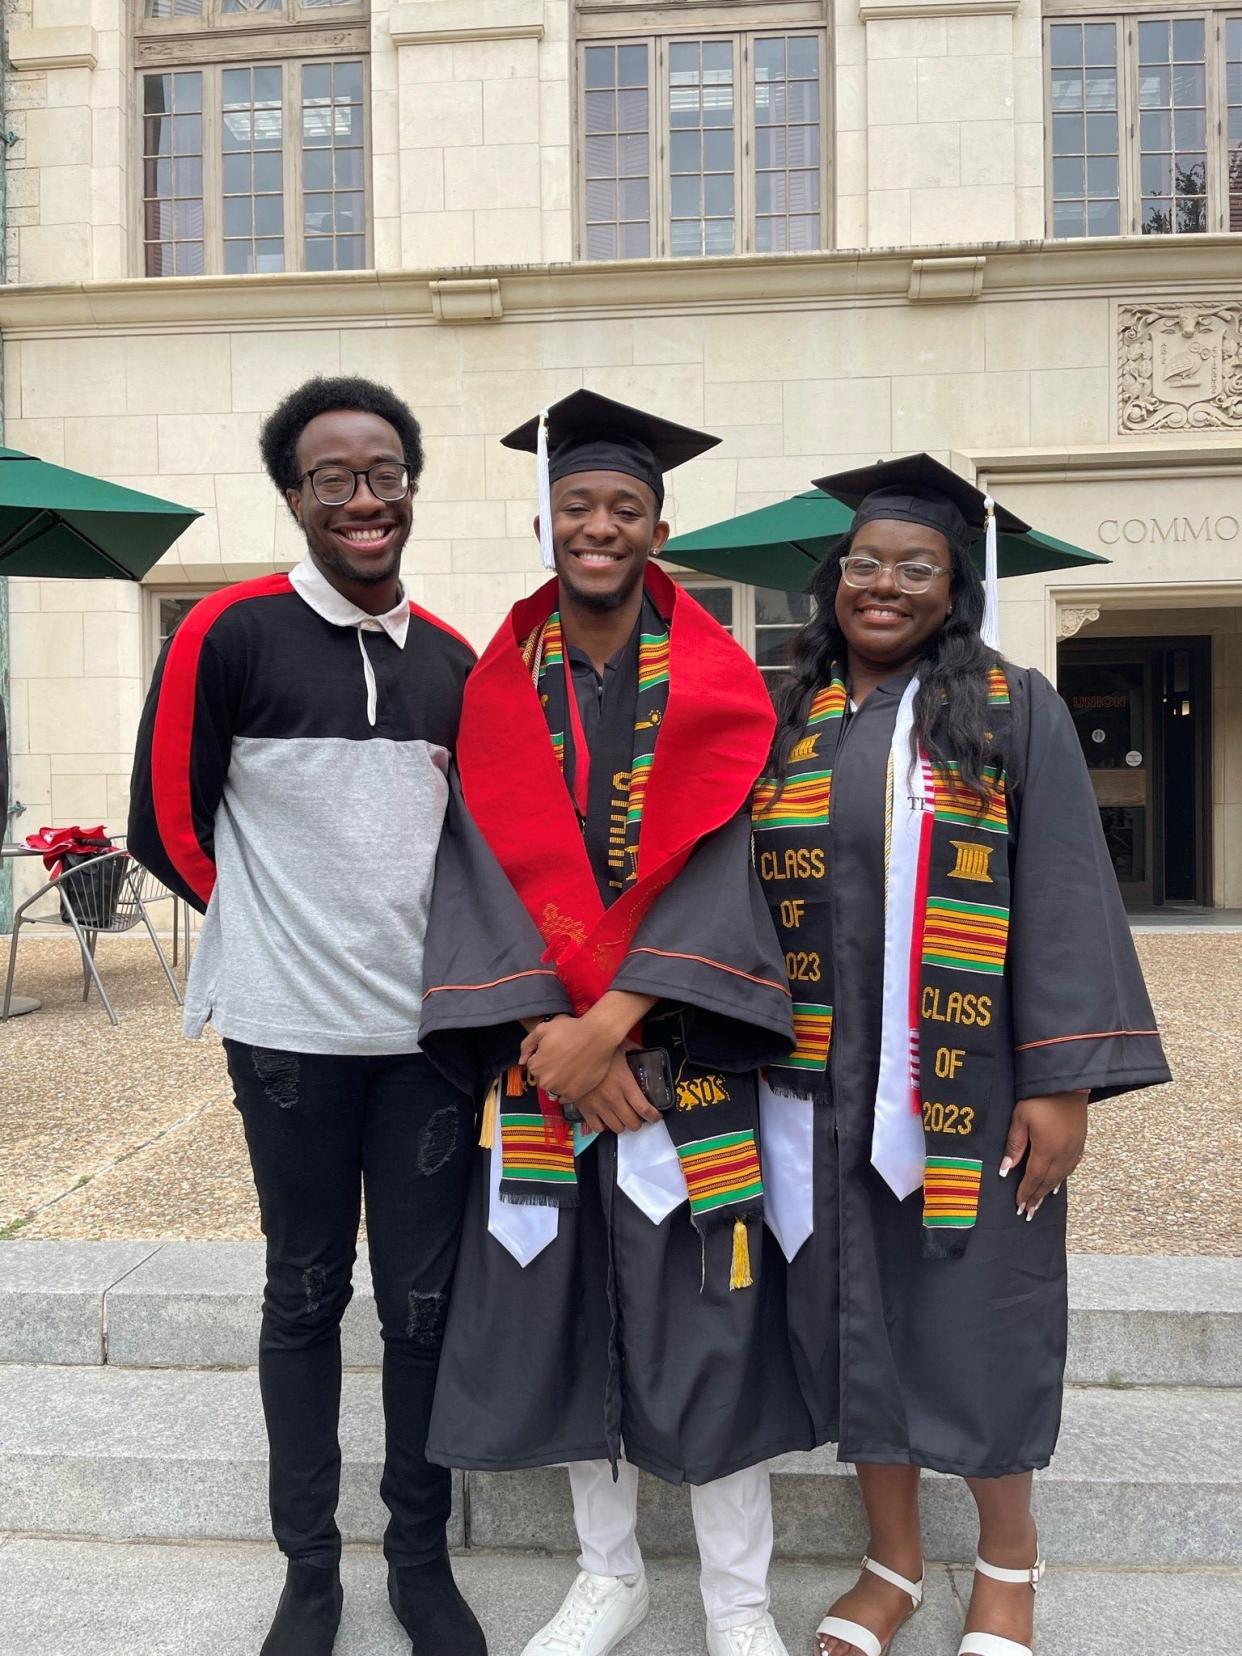 Zion James, center, stands with friend Justin Okougbodu, left, and fellow graduate Shelby Davis on the University of Texas campus after the Black Graduation ceremony in May 2023.